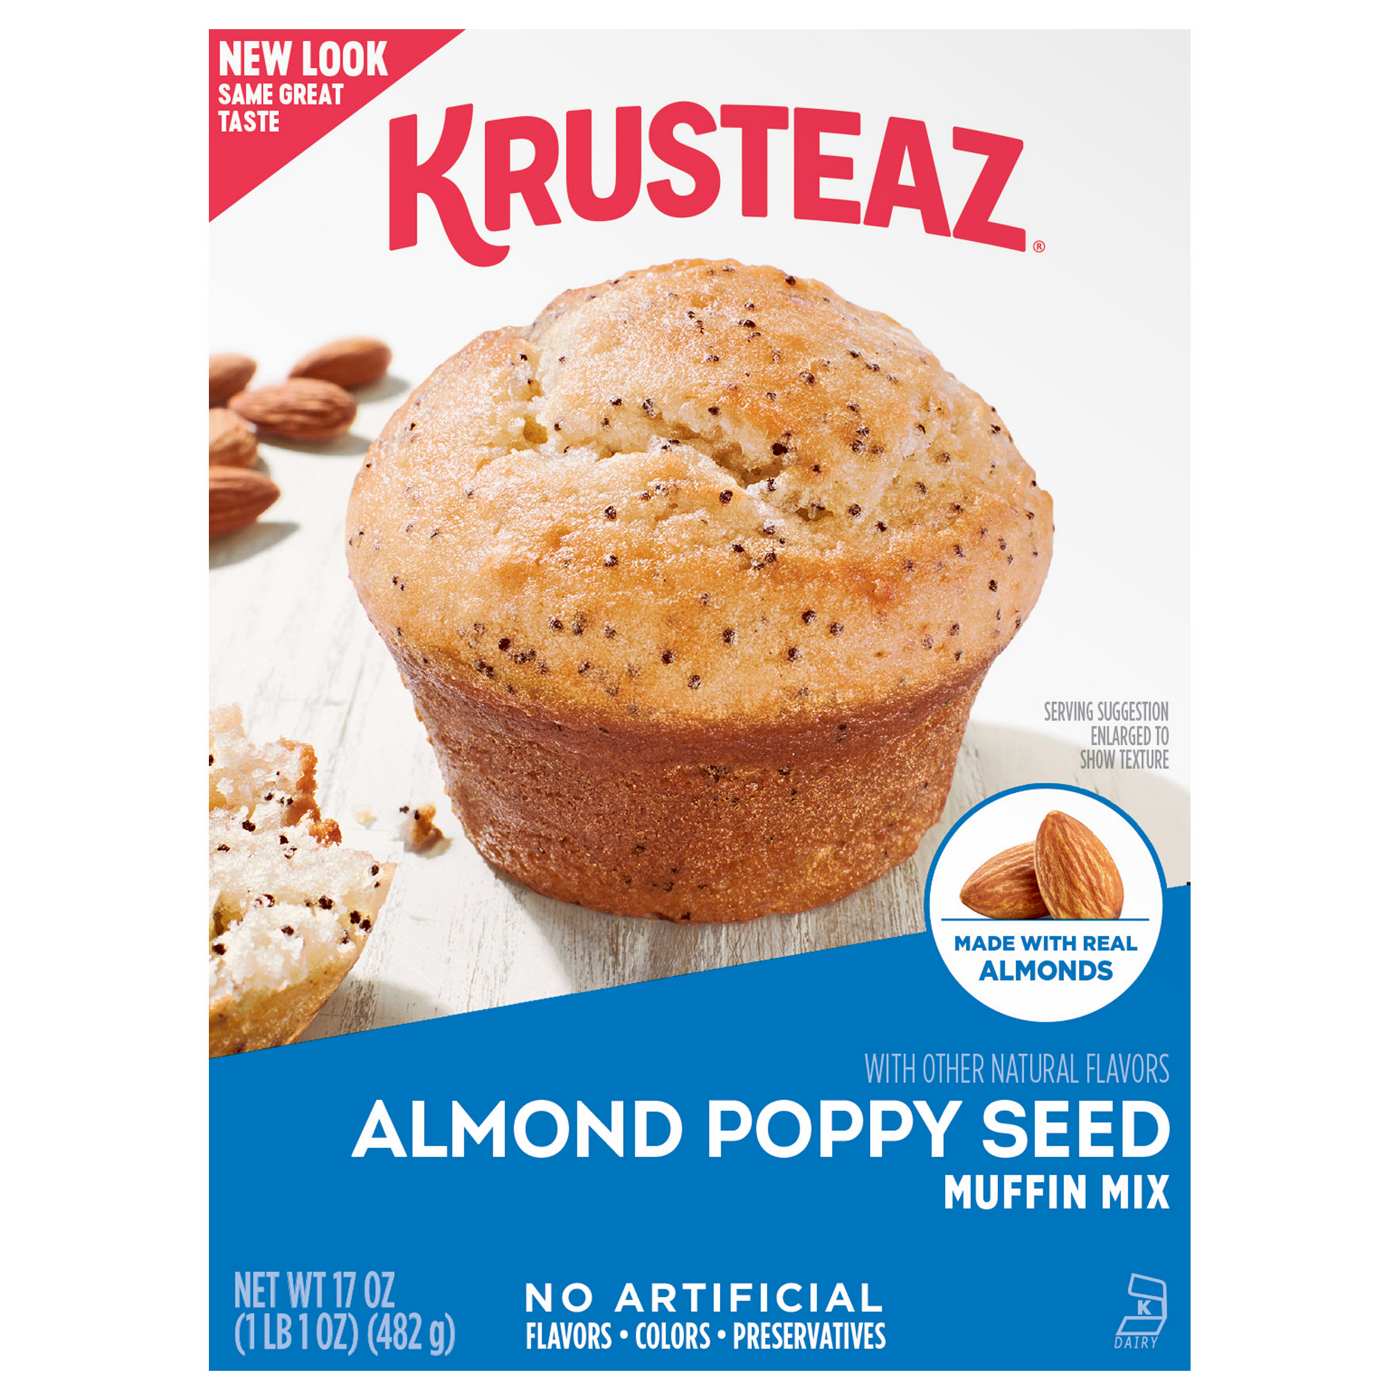 Krusteaz Almond Poppy Seed Muffin Mix; image 1 of 7